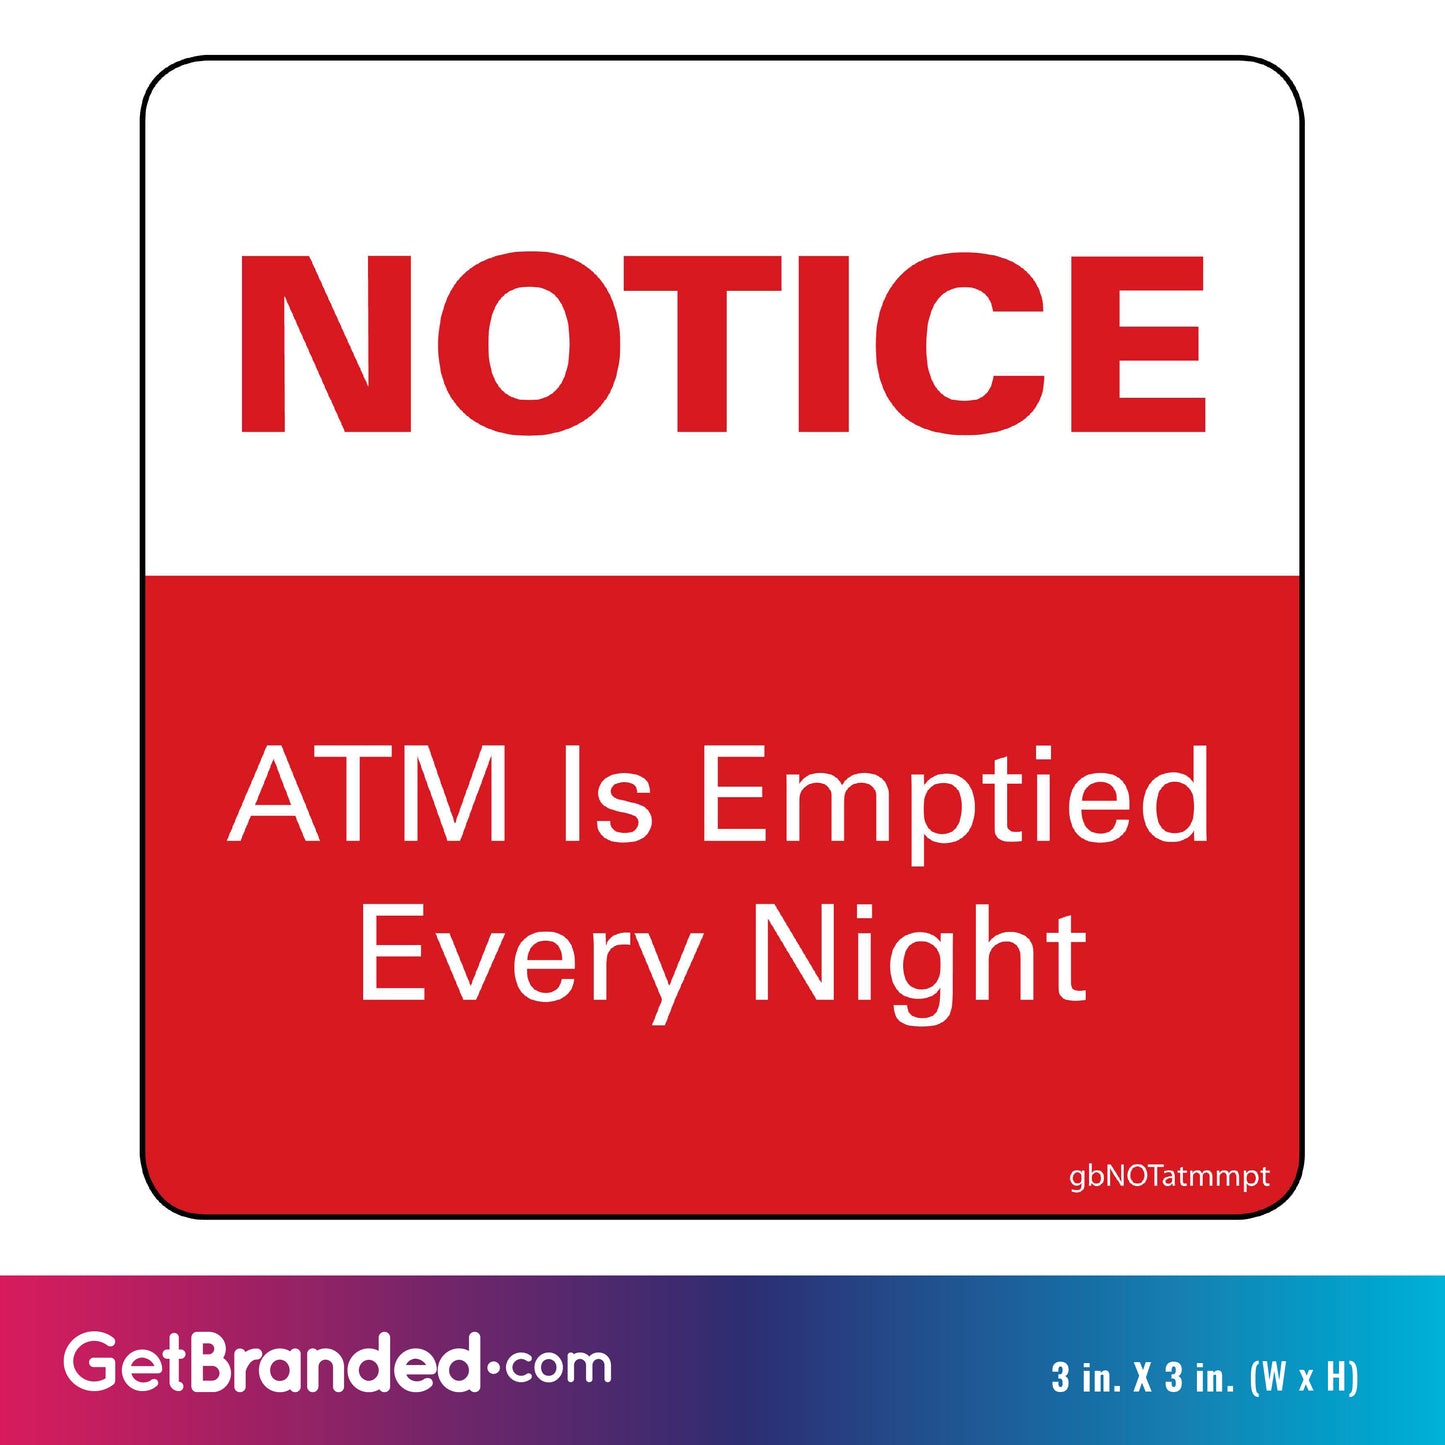 ATM is Emptied Every Night Notice Decal size guide. 3 inches by 3 inches in size.